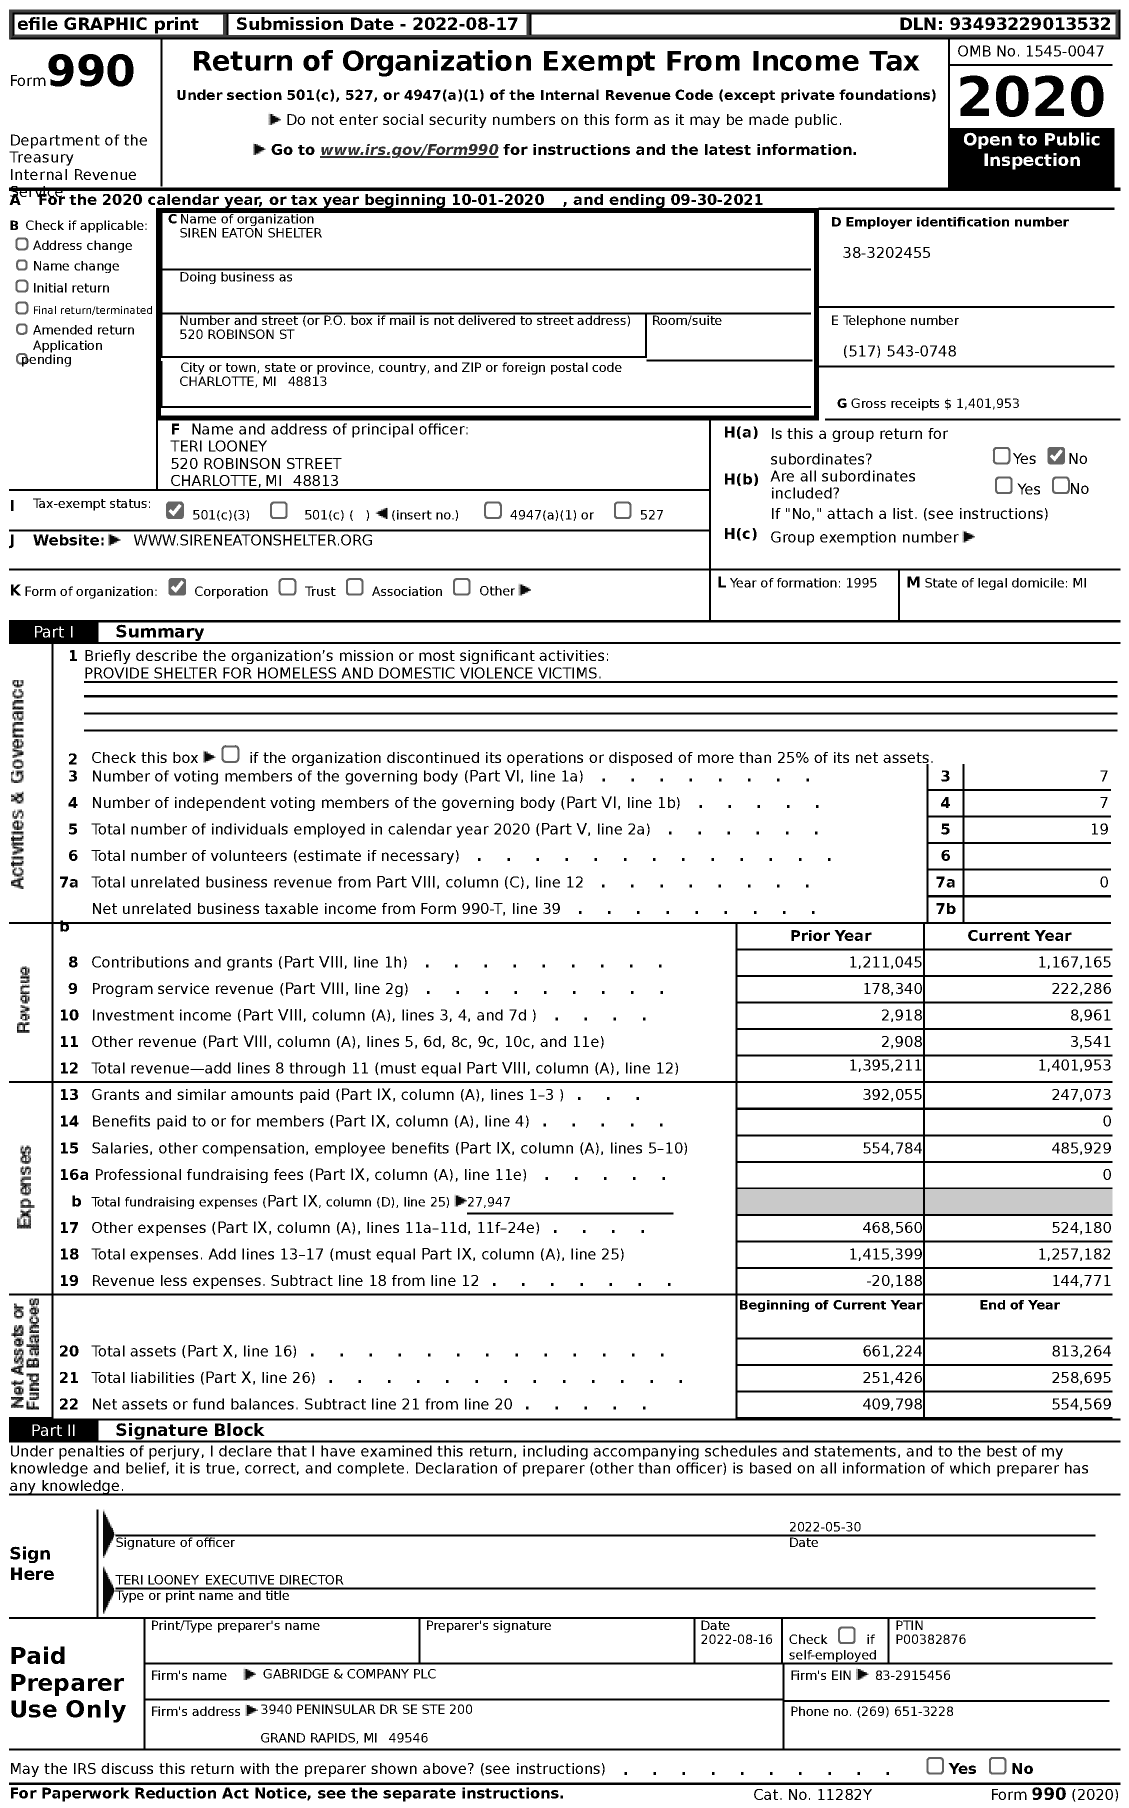 Image of first page of 2020 Form 990 for Siren-Eaton Shelter